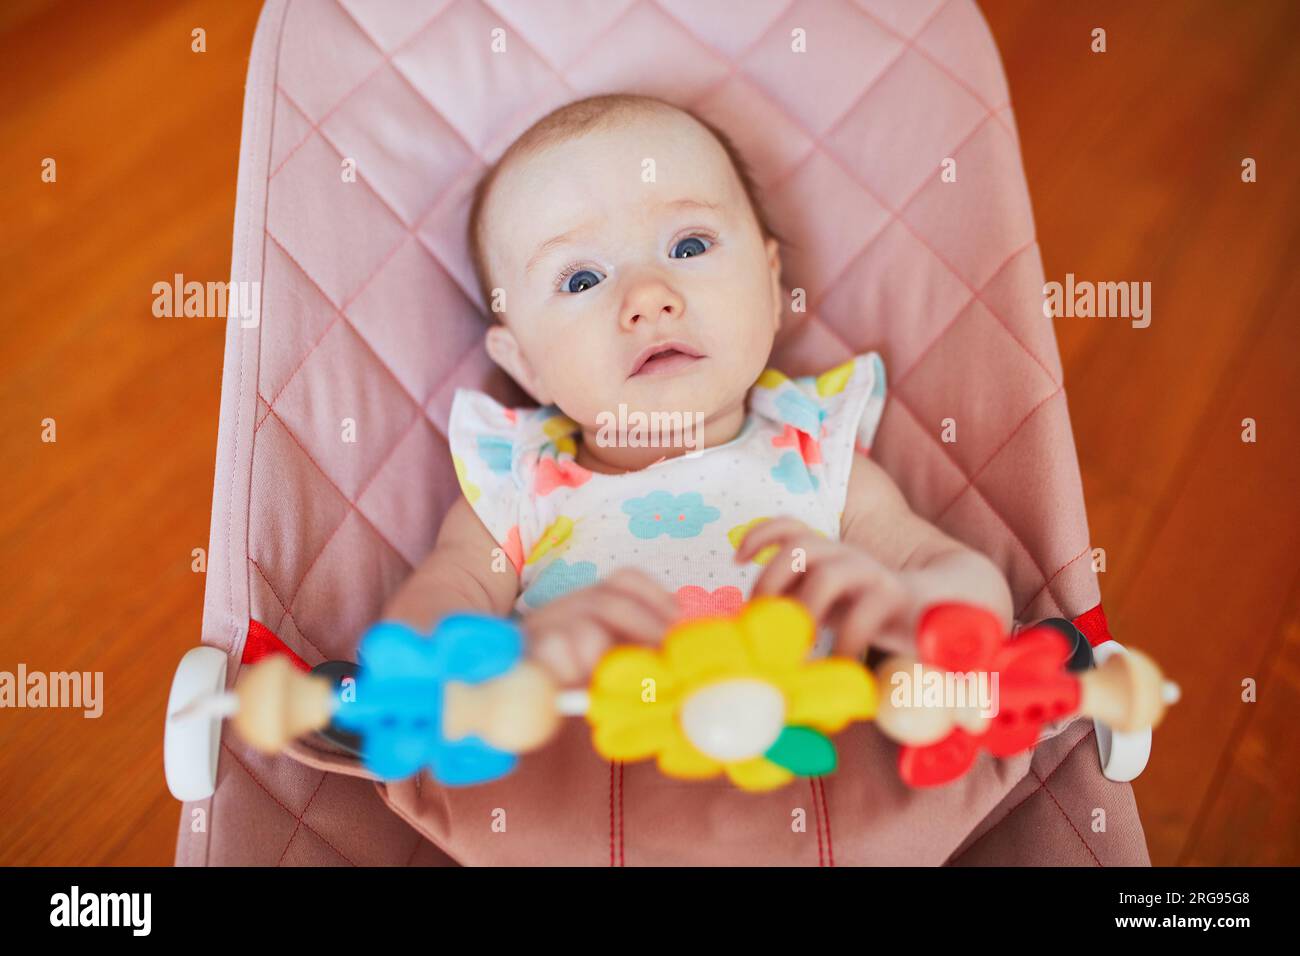 Adorable baby girl sitting in bouncer and playing with colorful toys Stock Photo